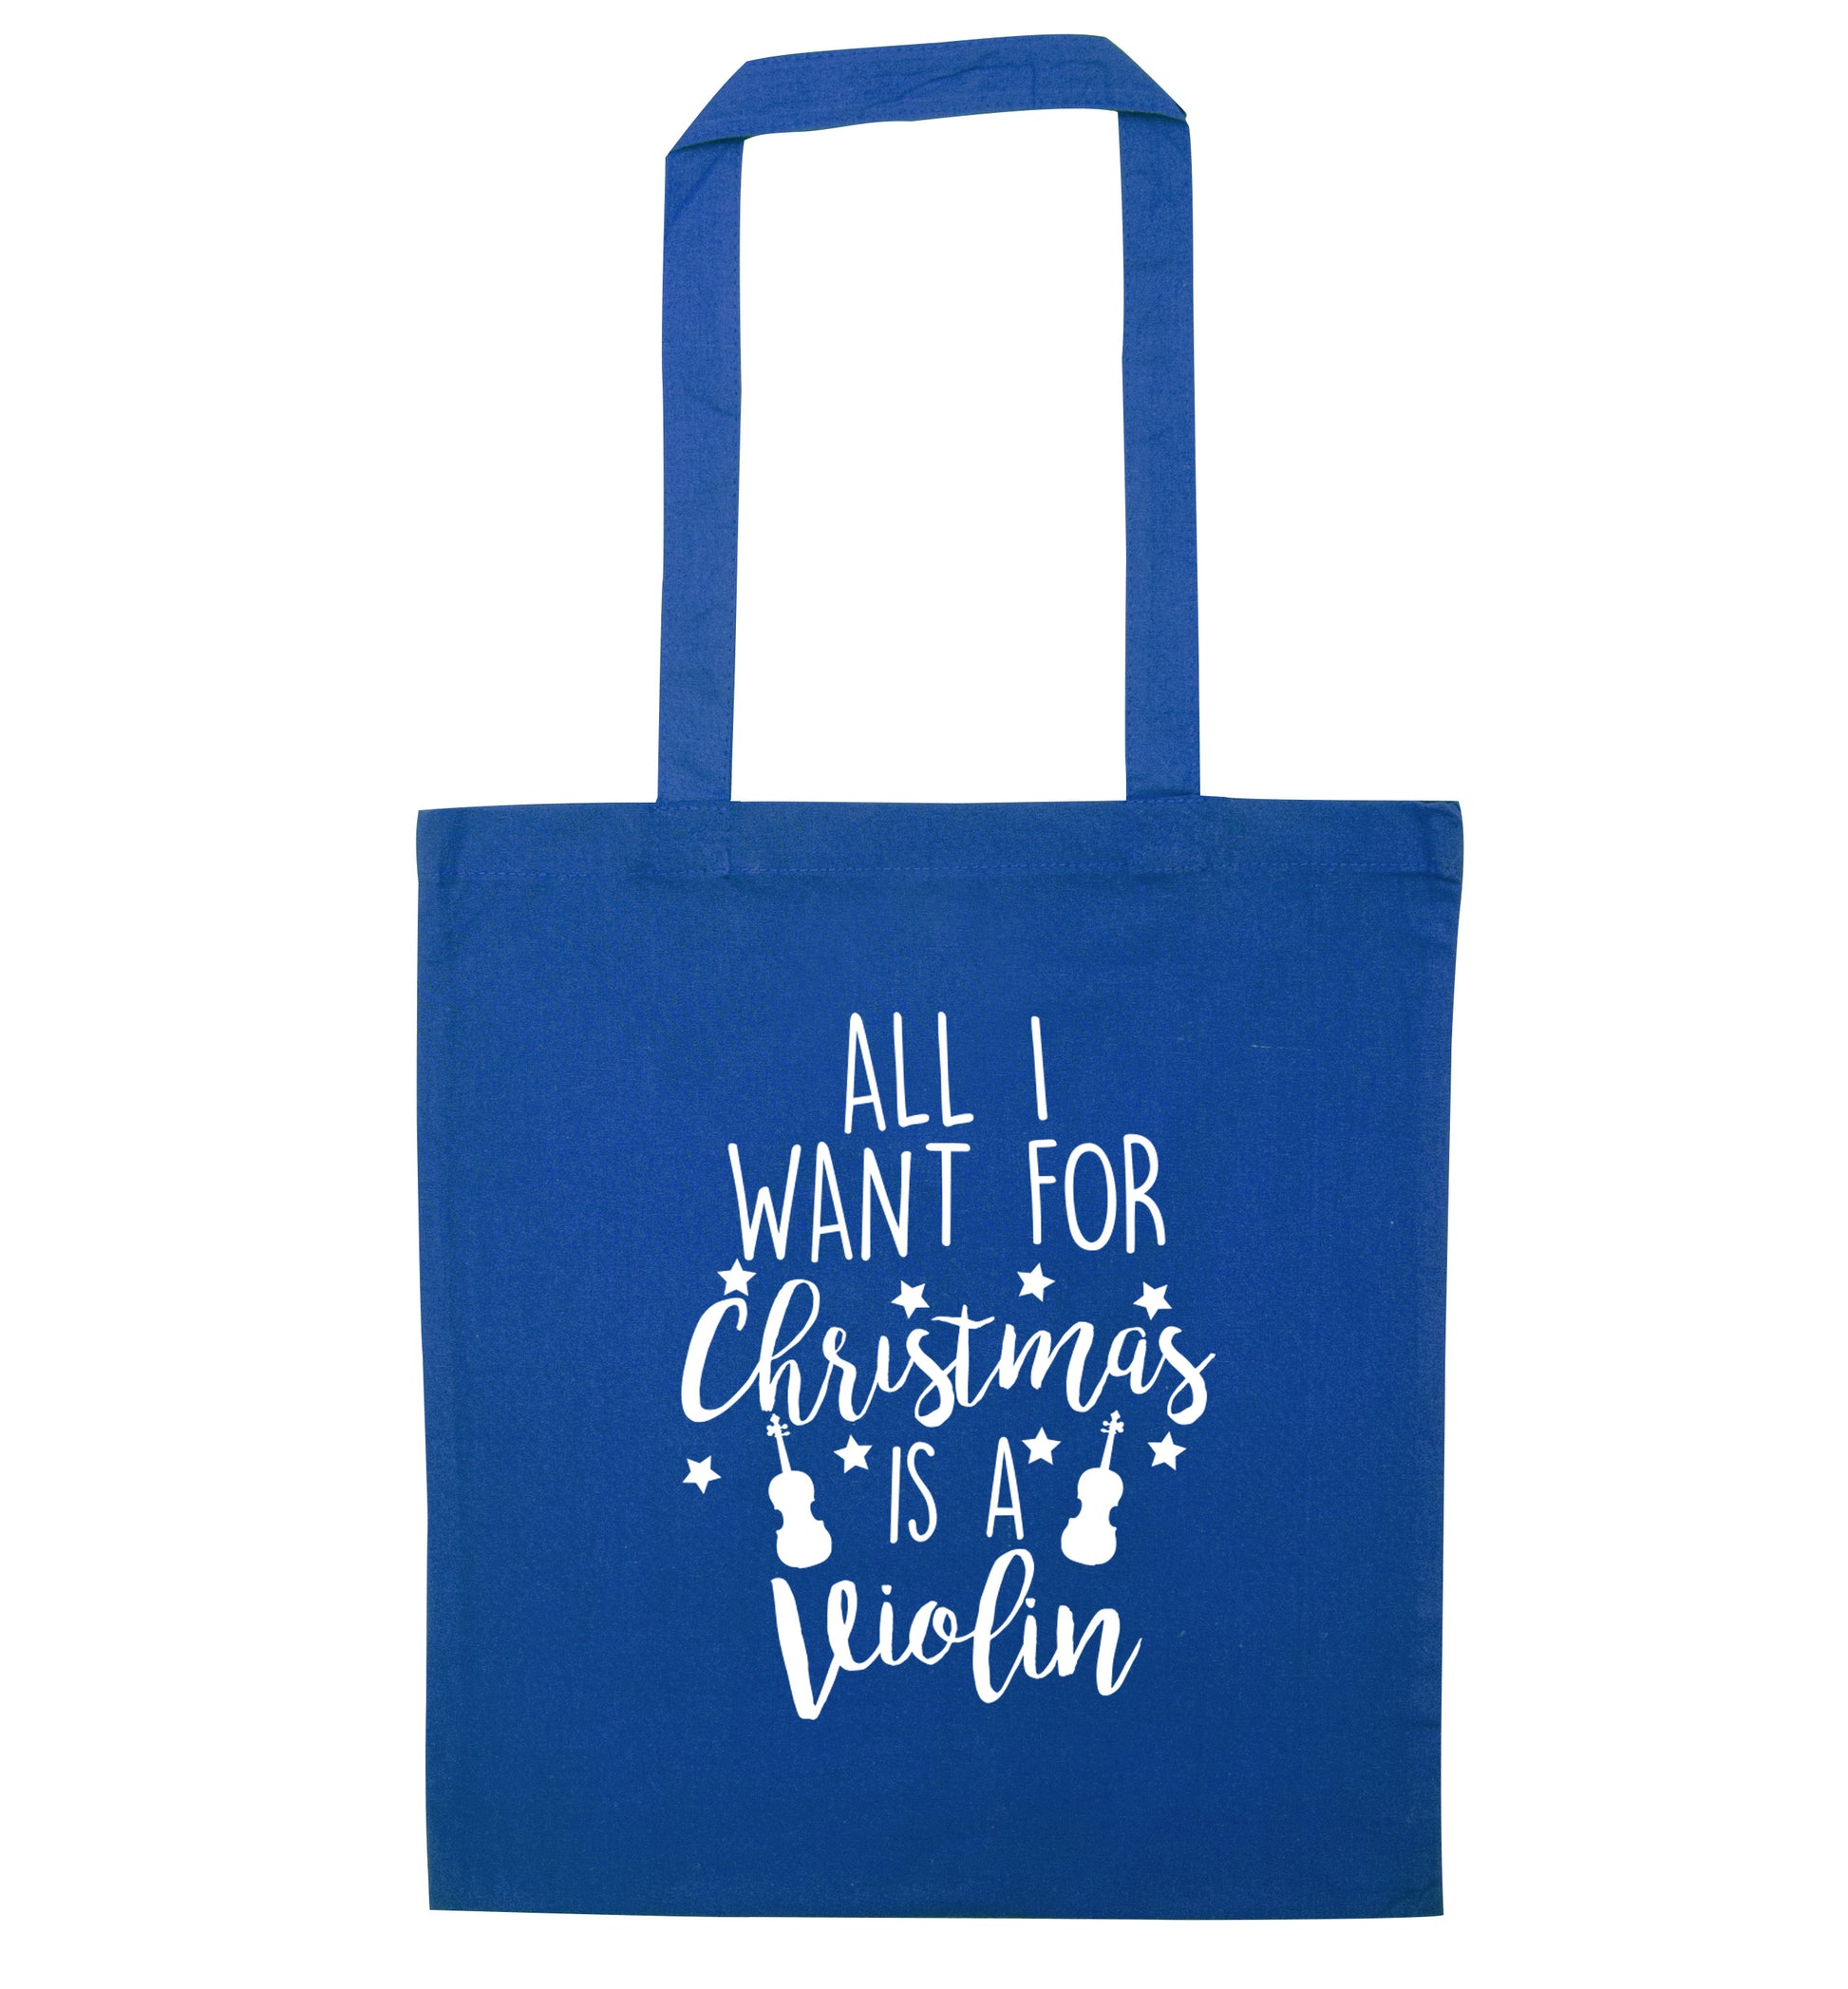 All I Want For Christmas is a Violin blue tote bag